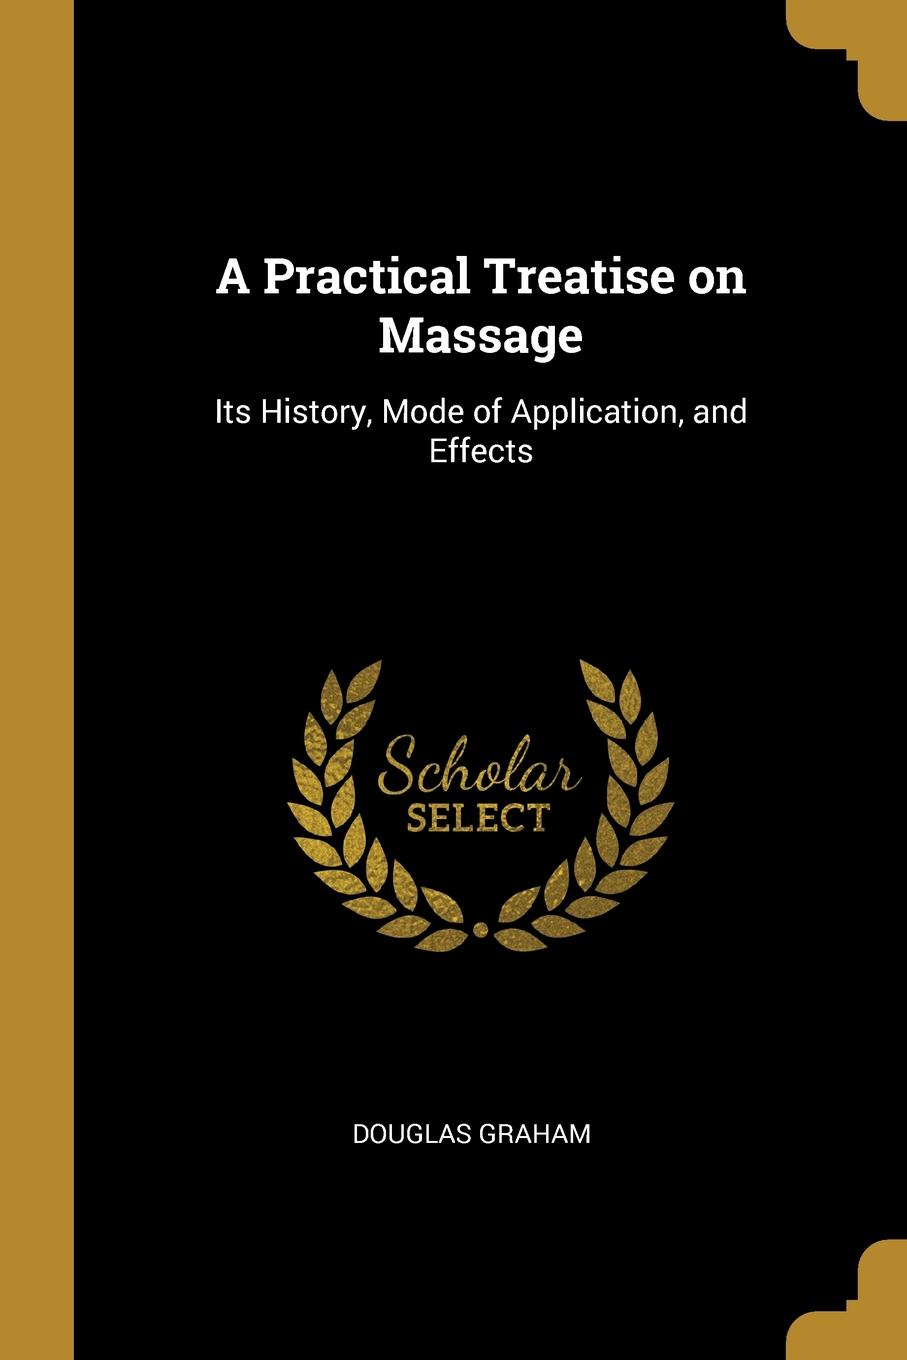 A Practical Treatise on Massage. Its History, Mode of Application, and Effects